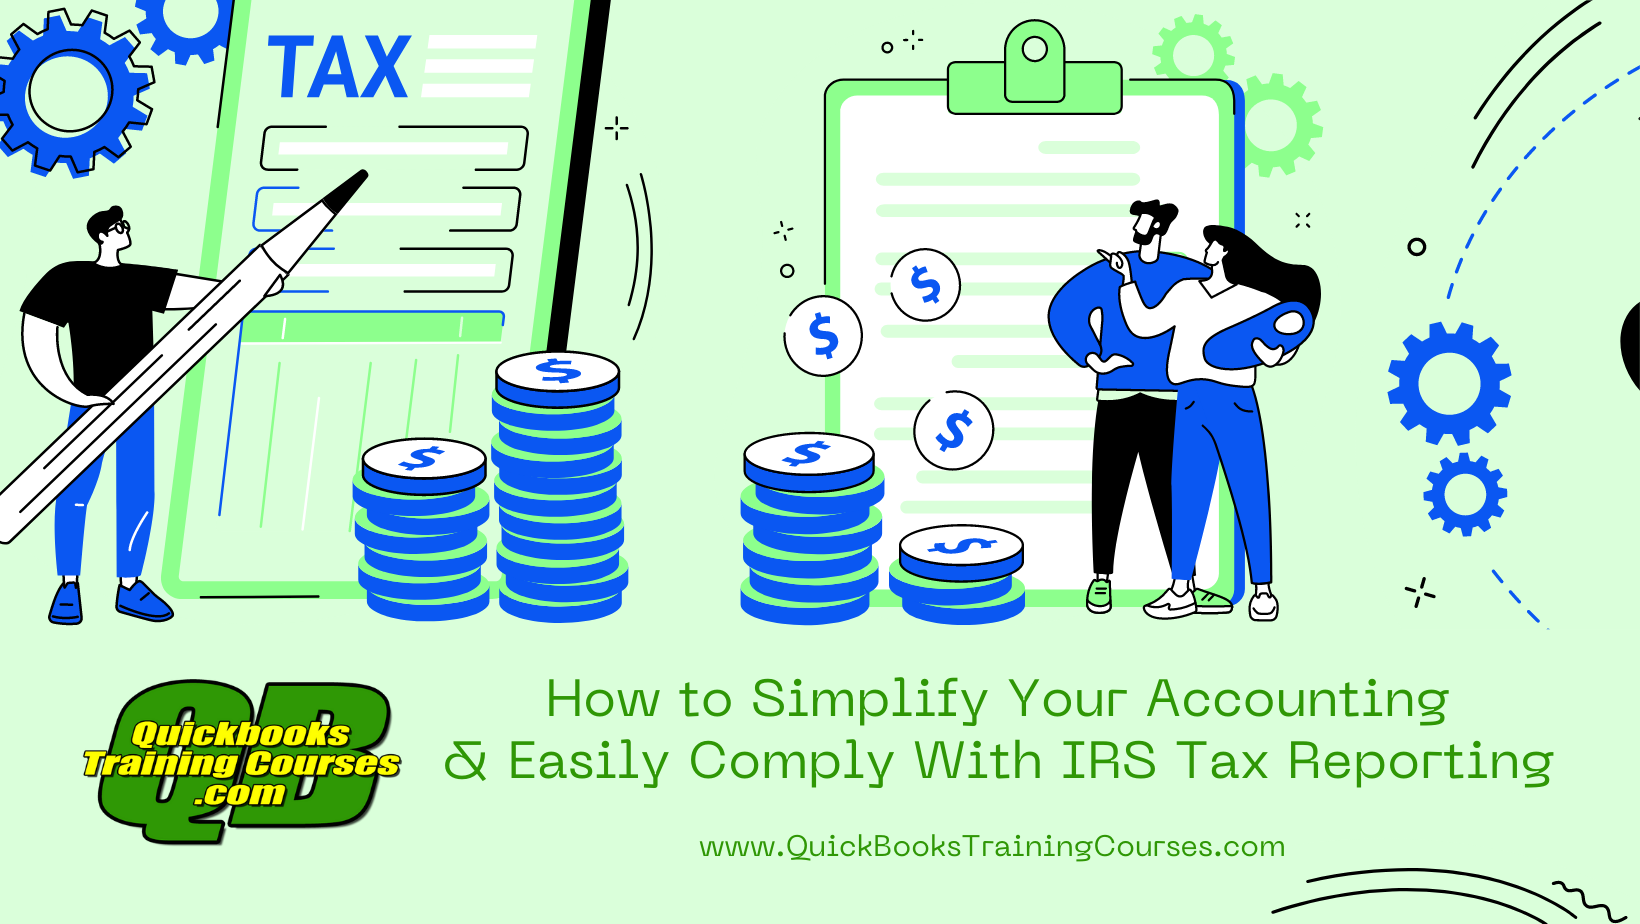 QuickBooks-How-to-Simplify-Your-Accounting-Easily-Comply With IRS Tax Reporting. QuickBooks Training Courses.